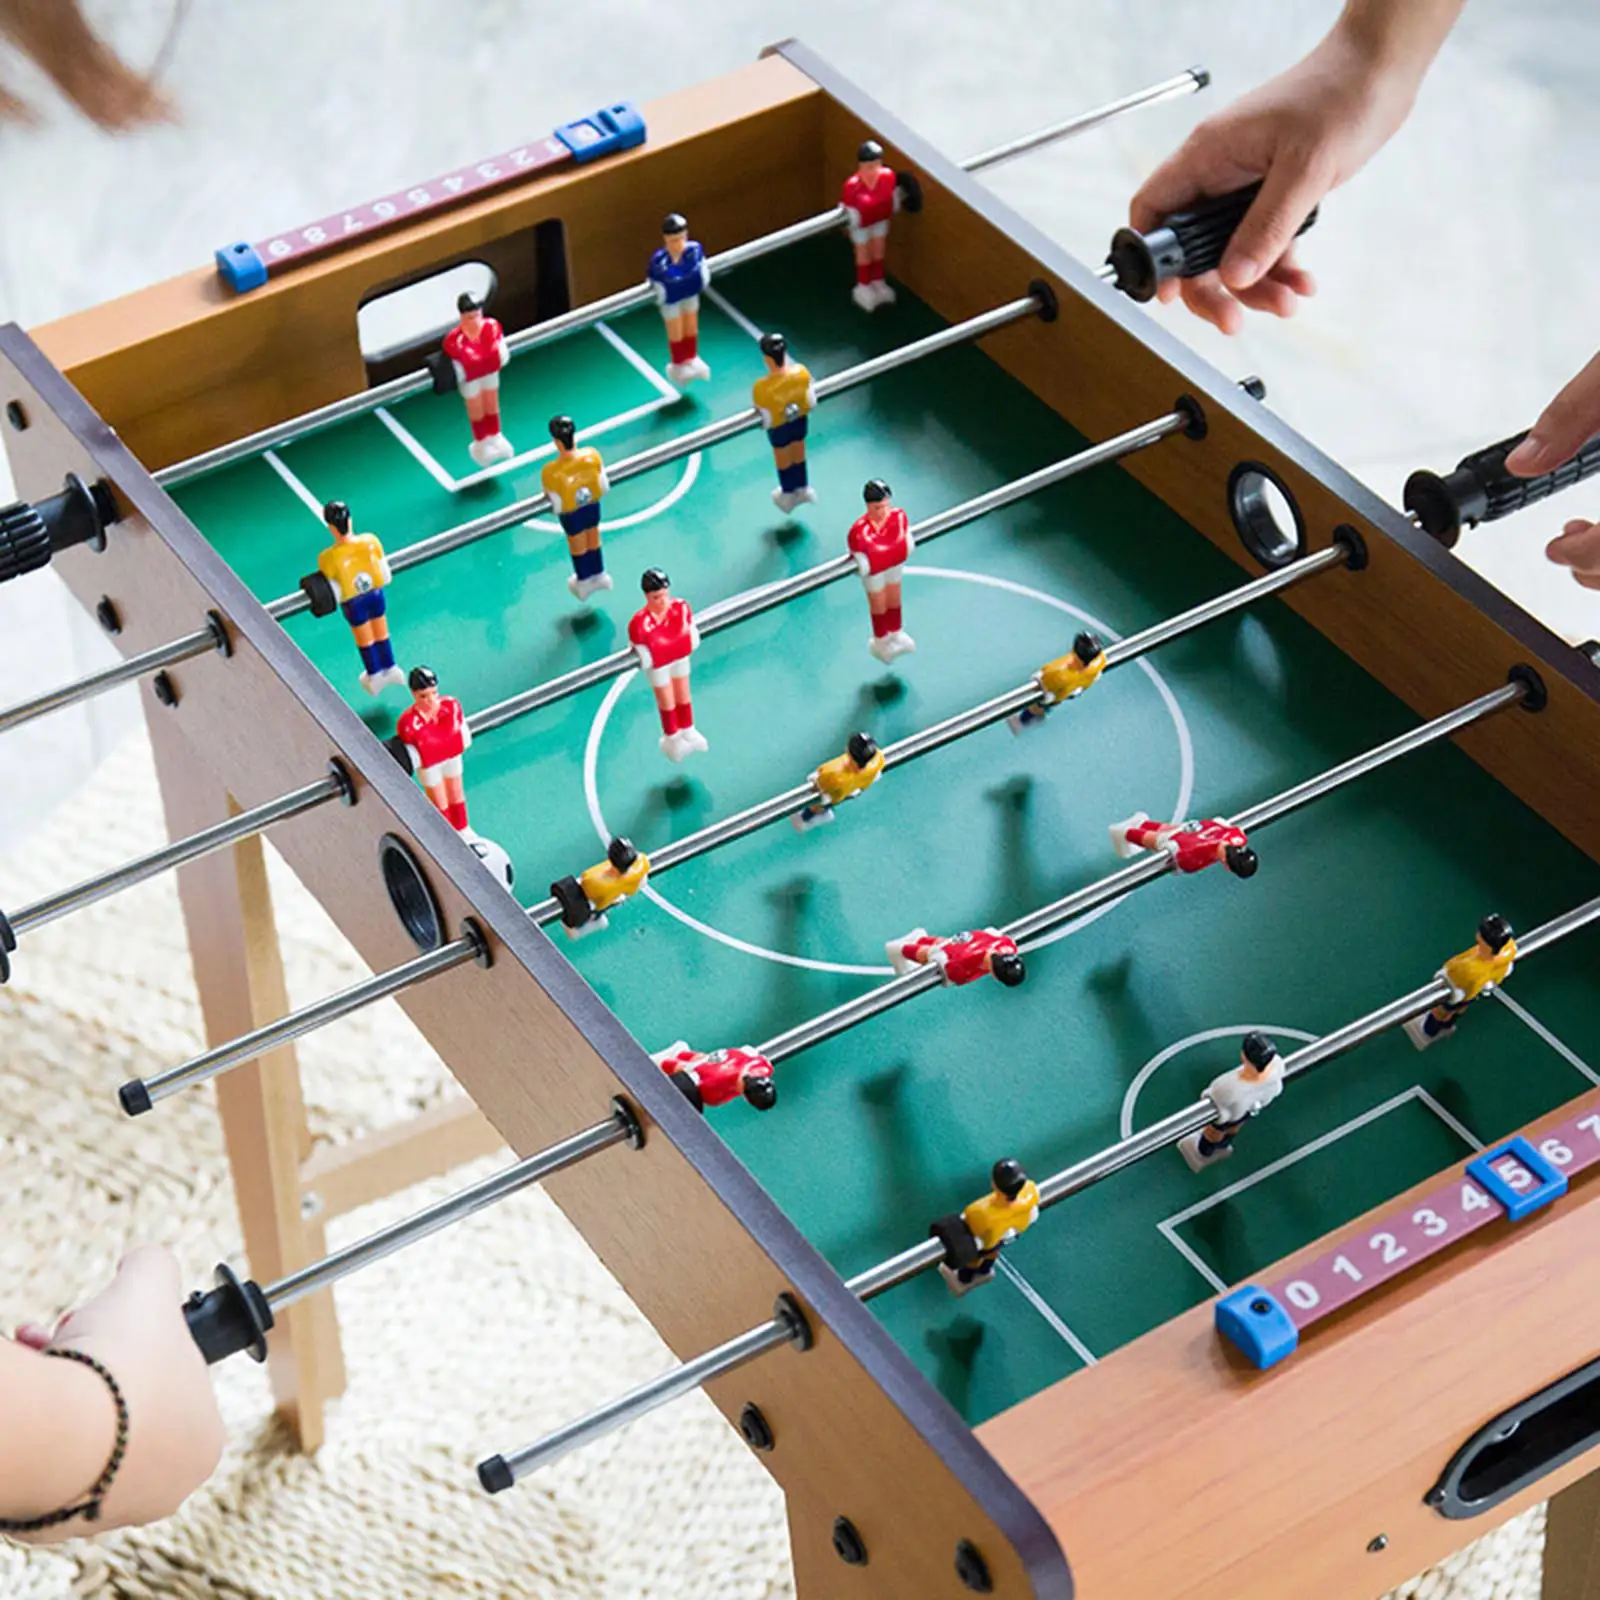 Wooden Foosball Table with Ball Tabletop Football Soccer Game for Outdoor